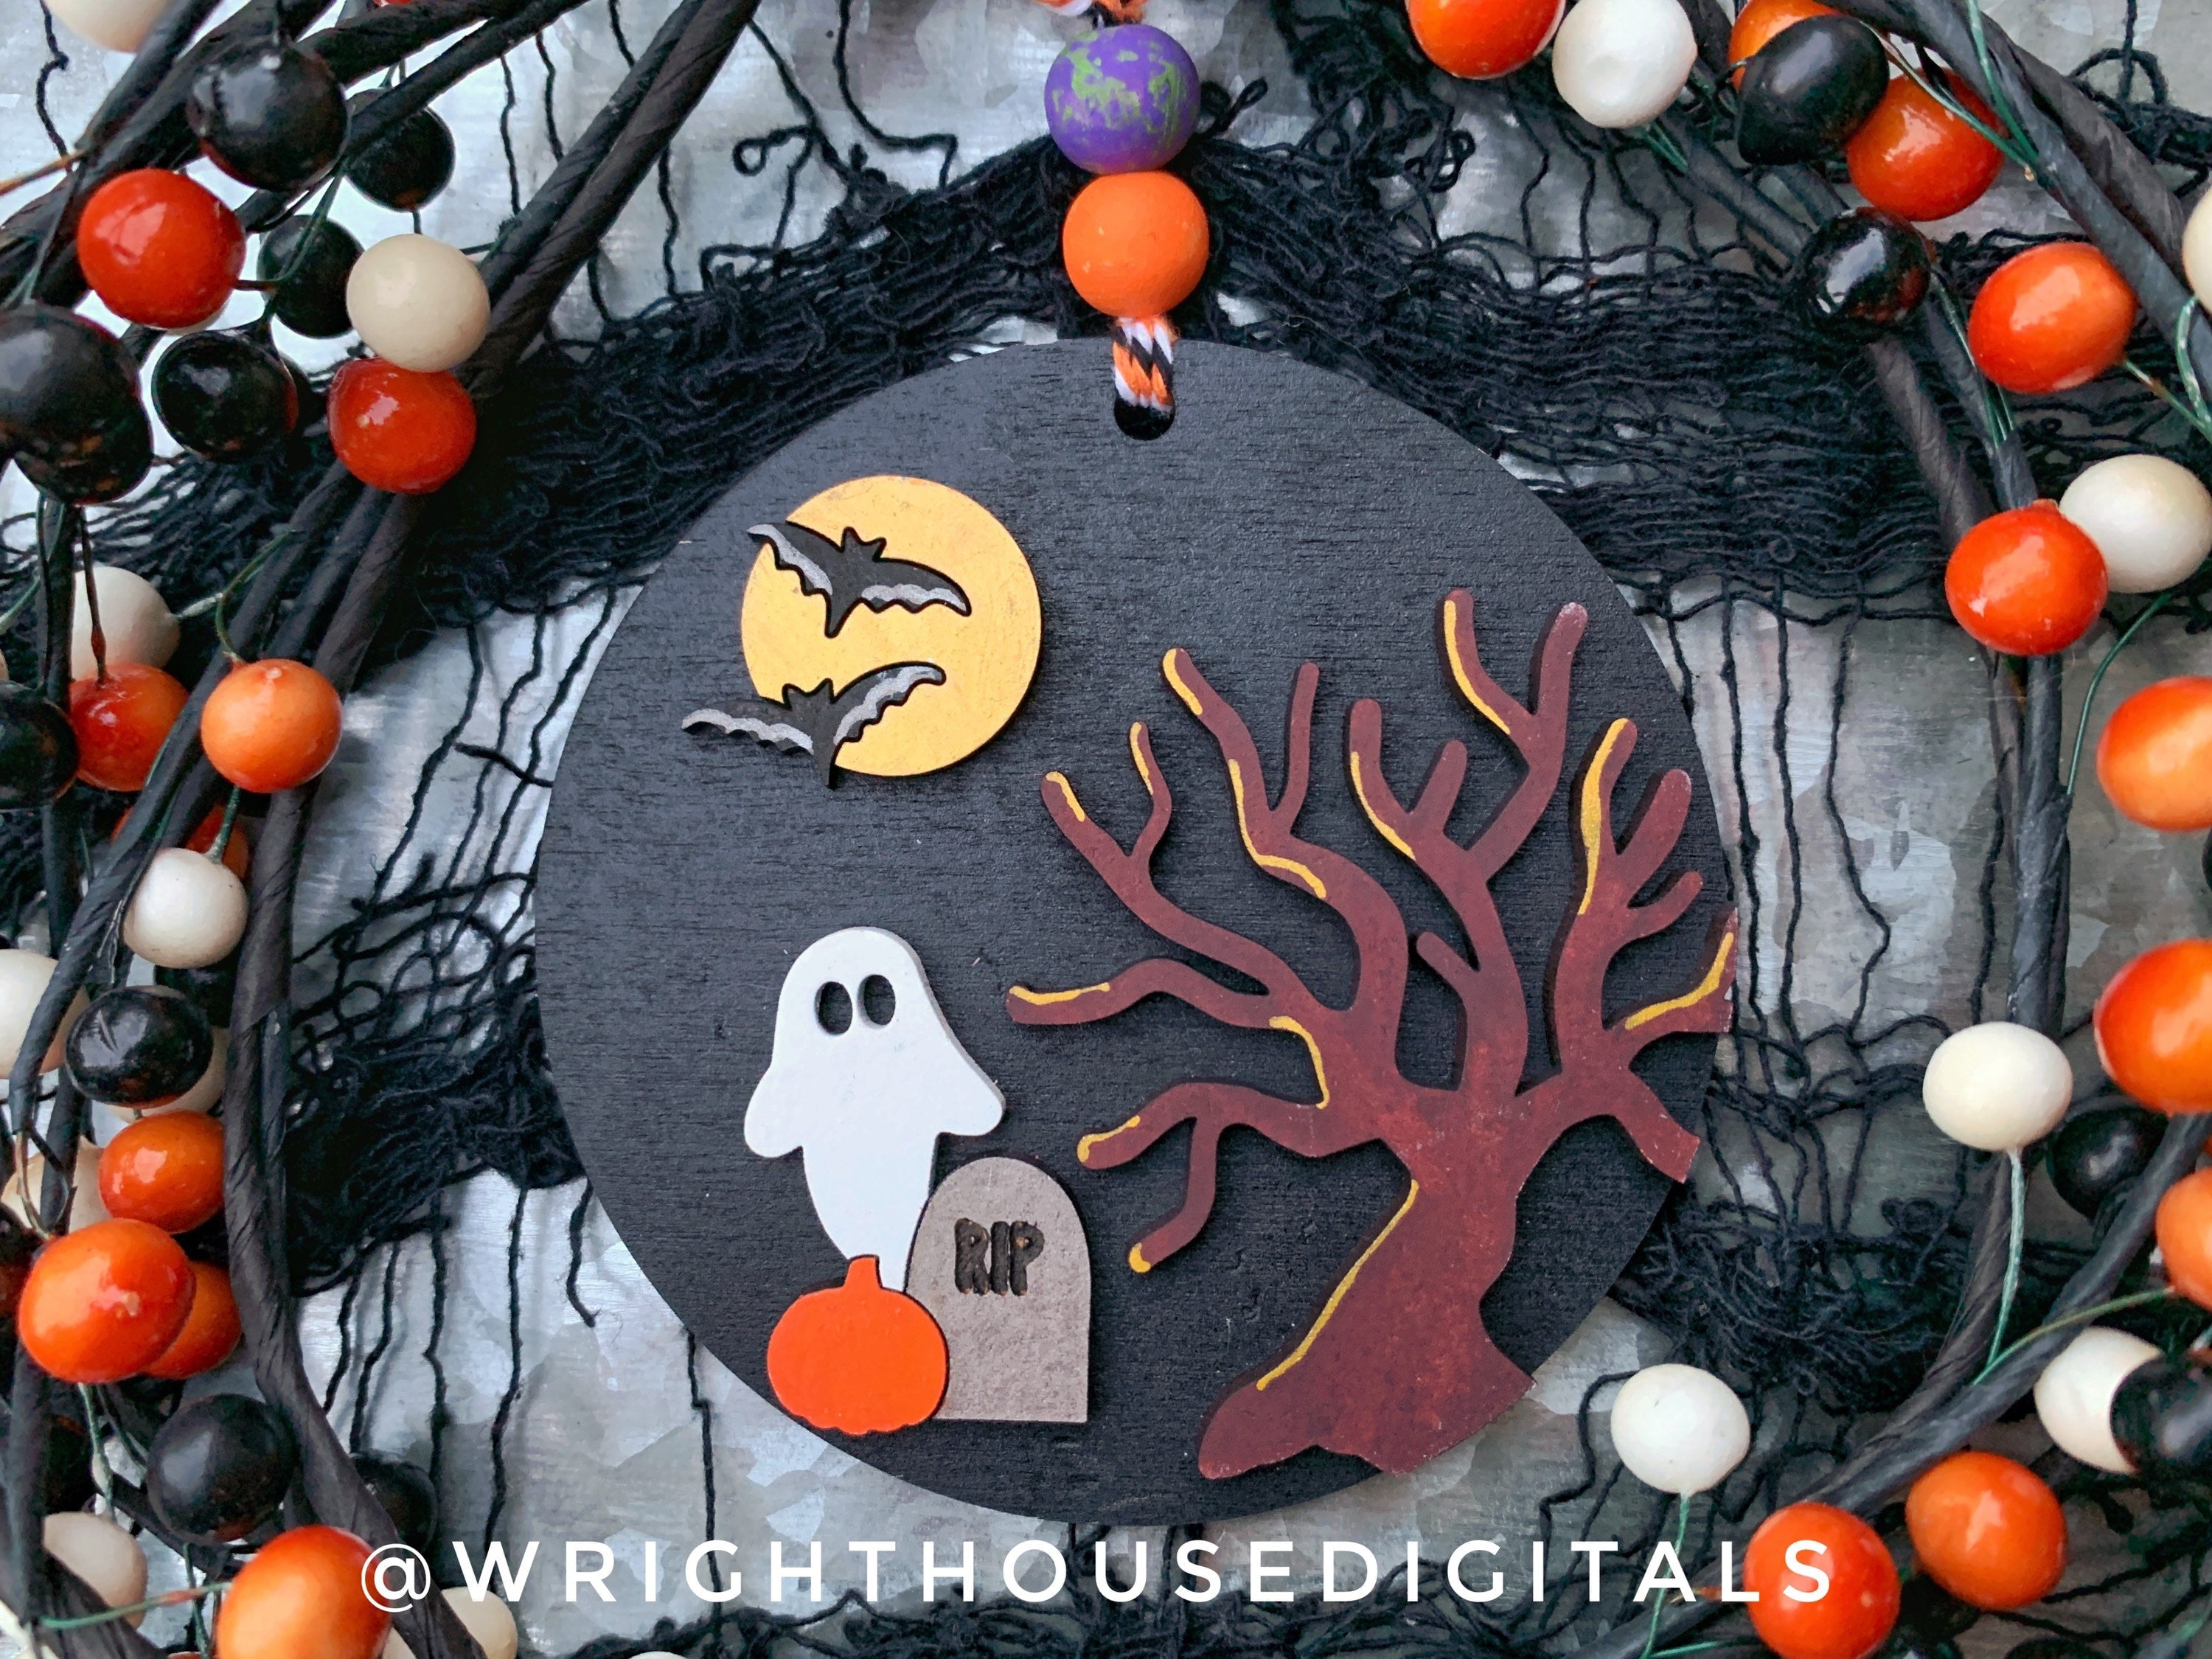 DIGITAL FILE - Halloween Icons - Haunted House - Shiplap Style Doodle Ornaments - SVG Cut File For Glowforge - Cut Files For Lasers